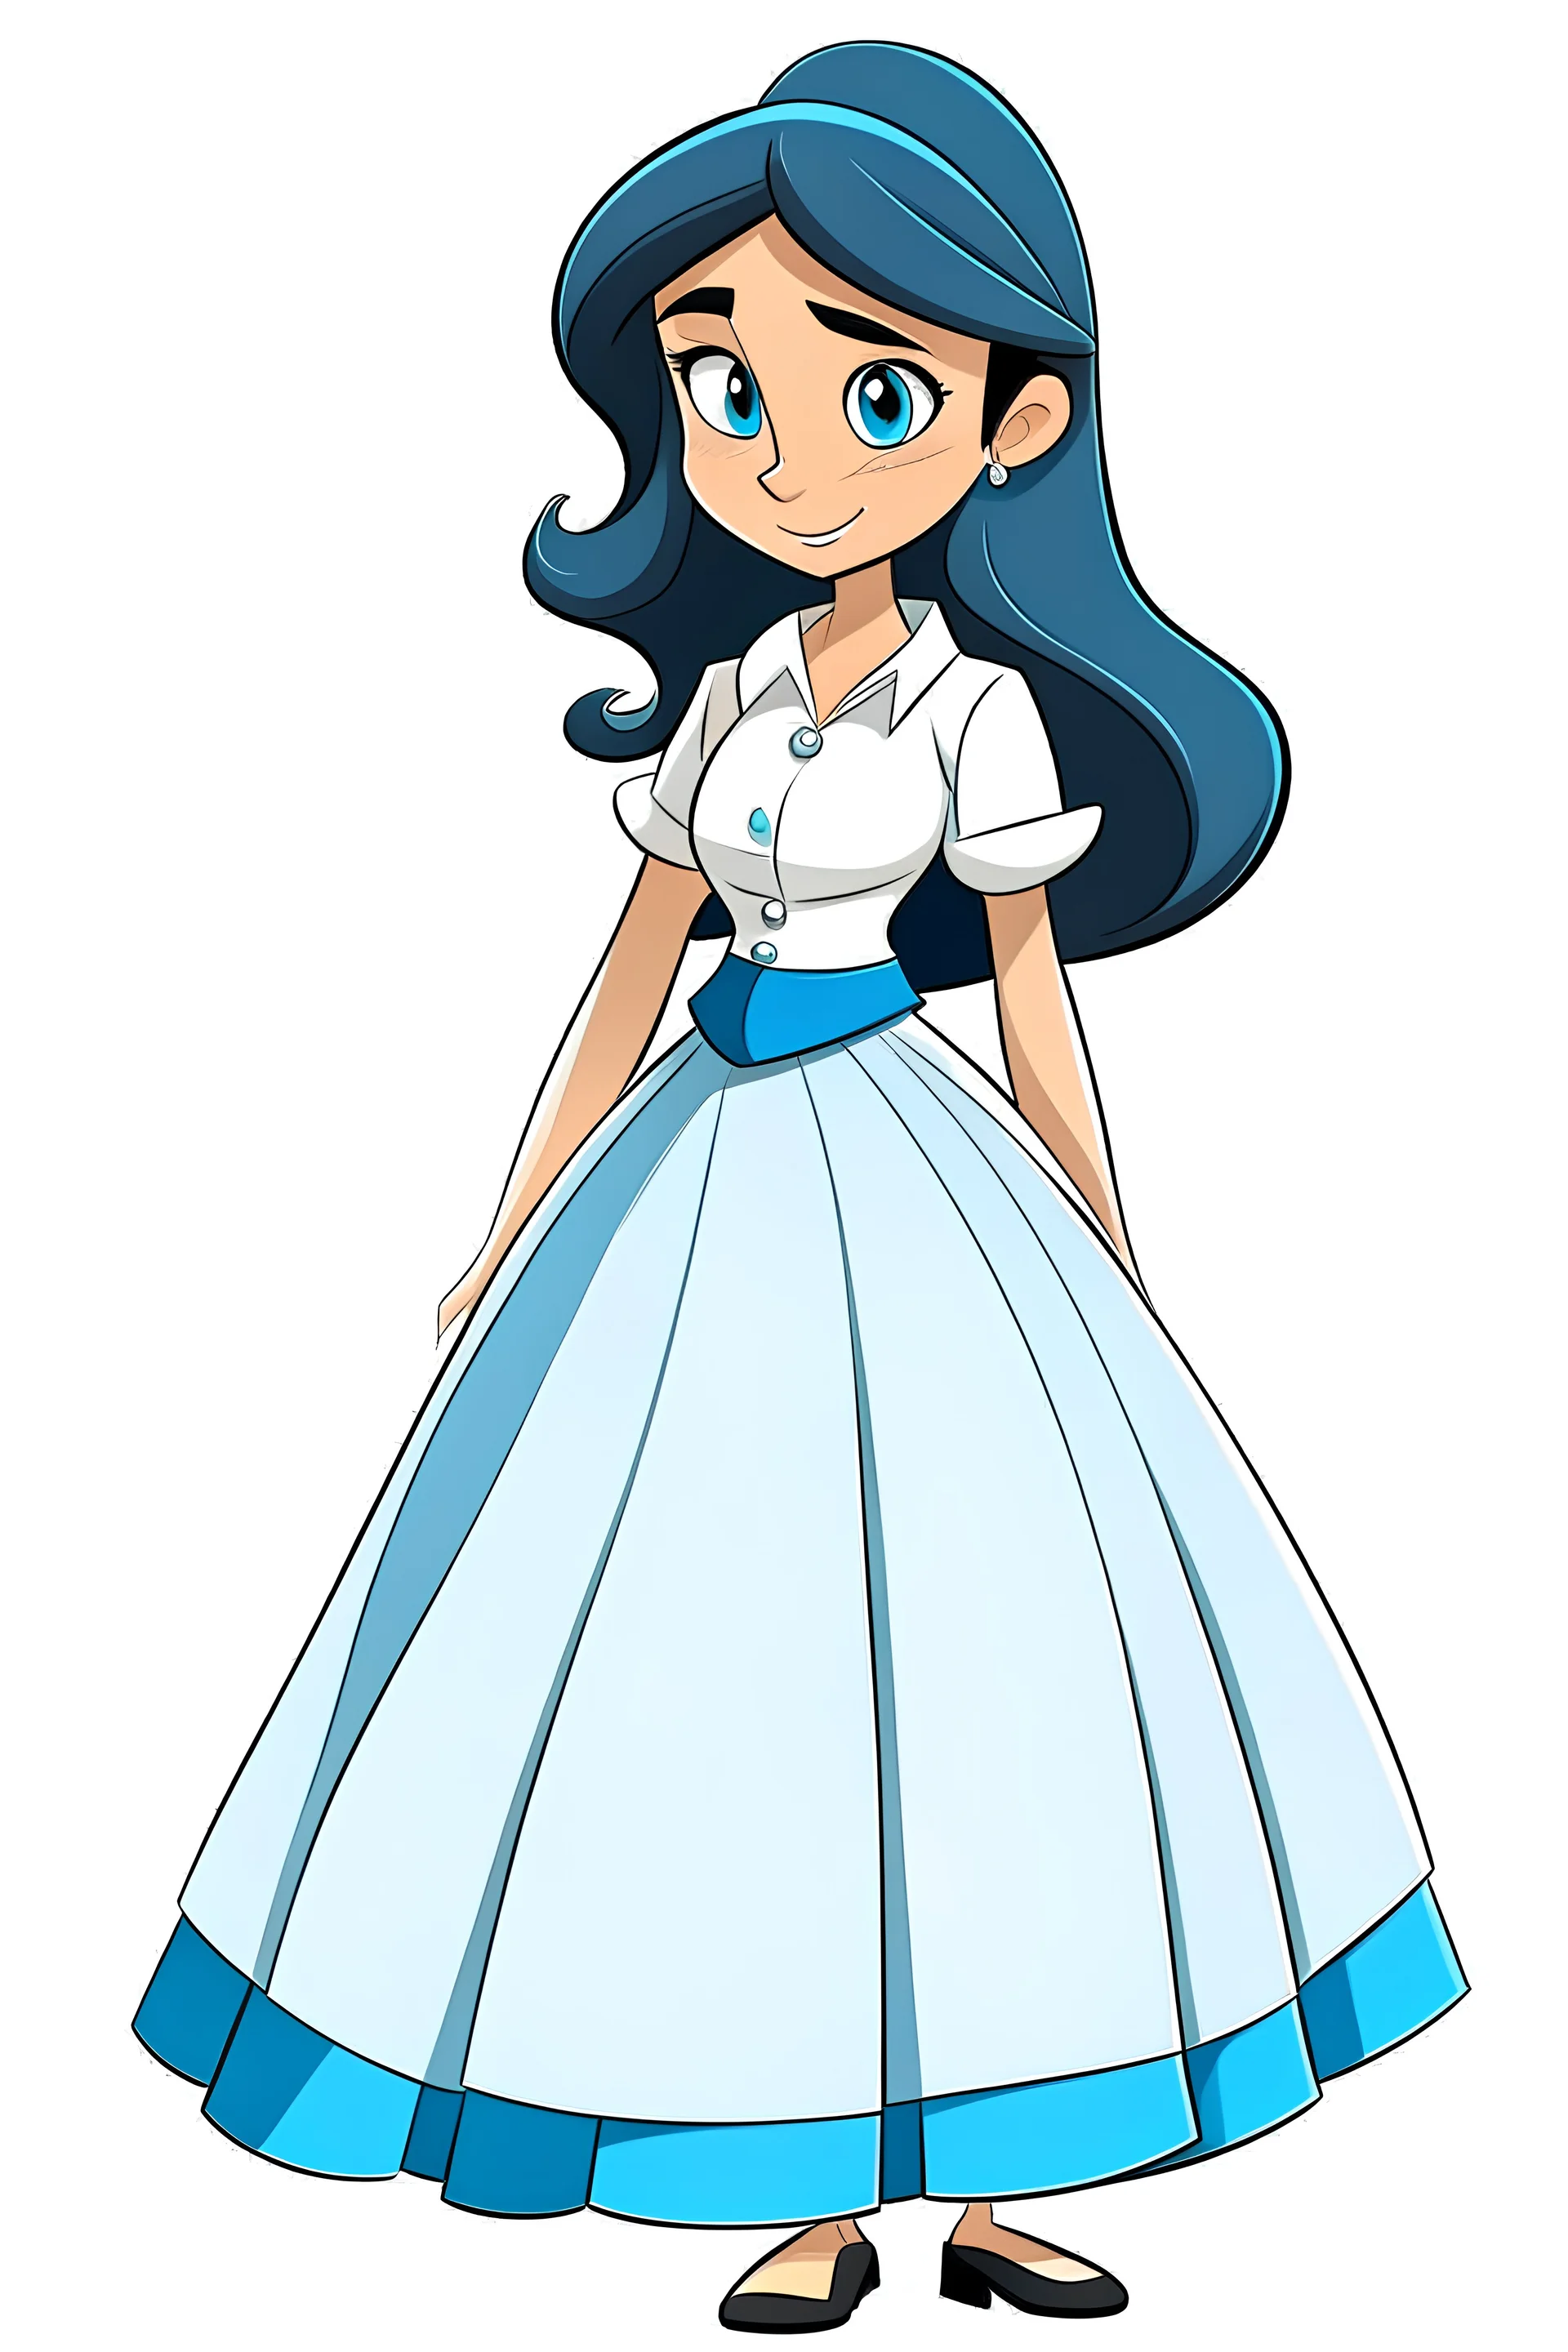 Design of a cartoon character wearing a long blue skirt and a white shirt, her long, thick and soft black hair, and her skin color is white.